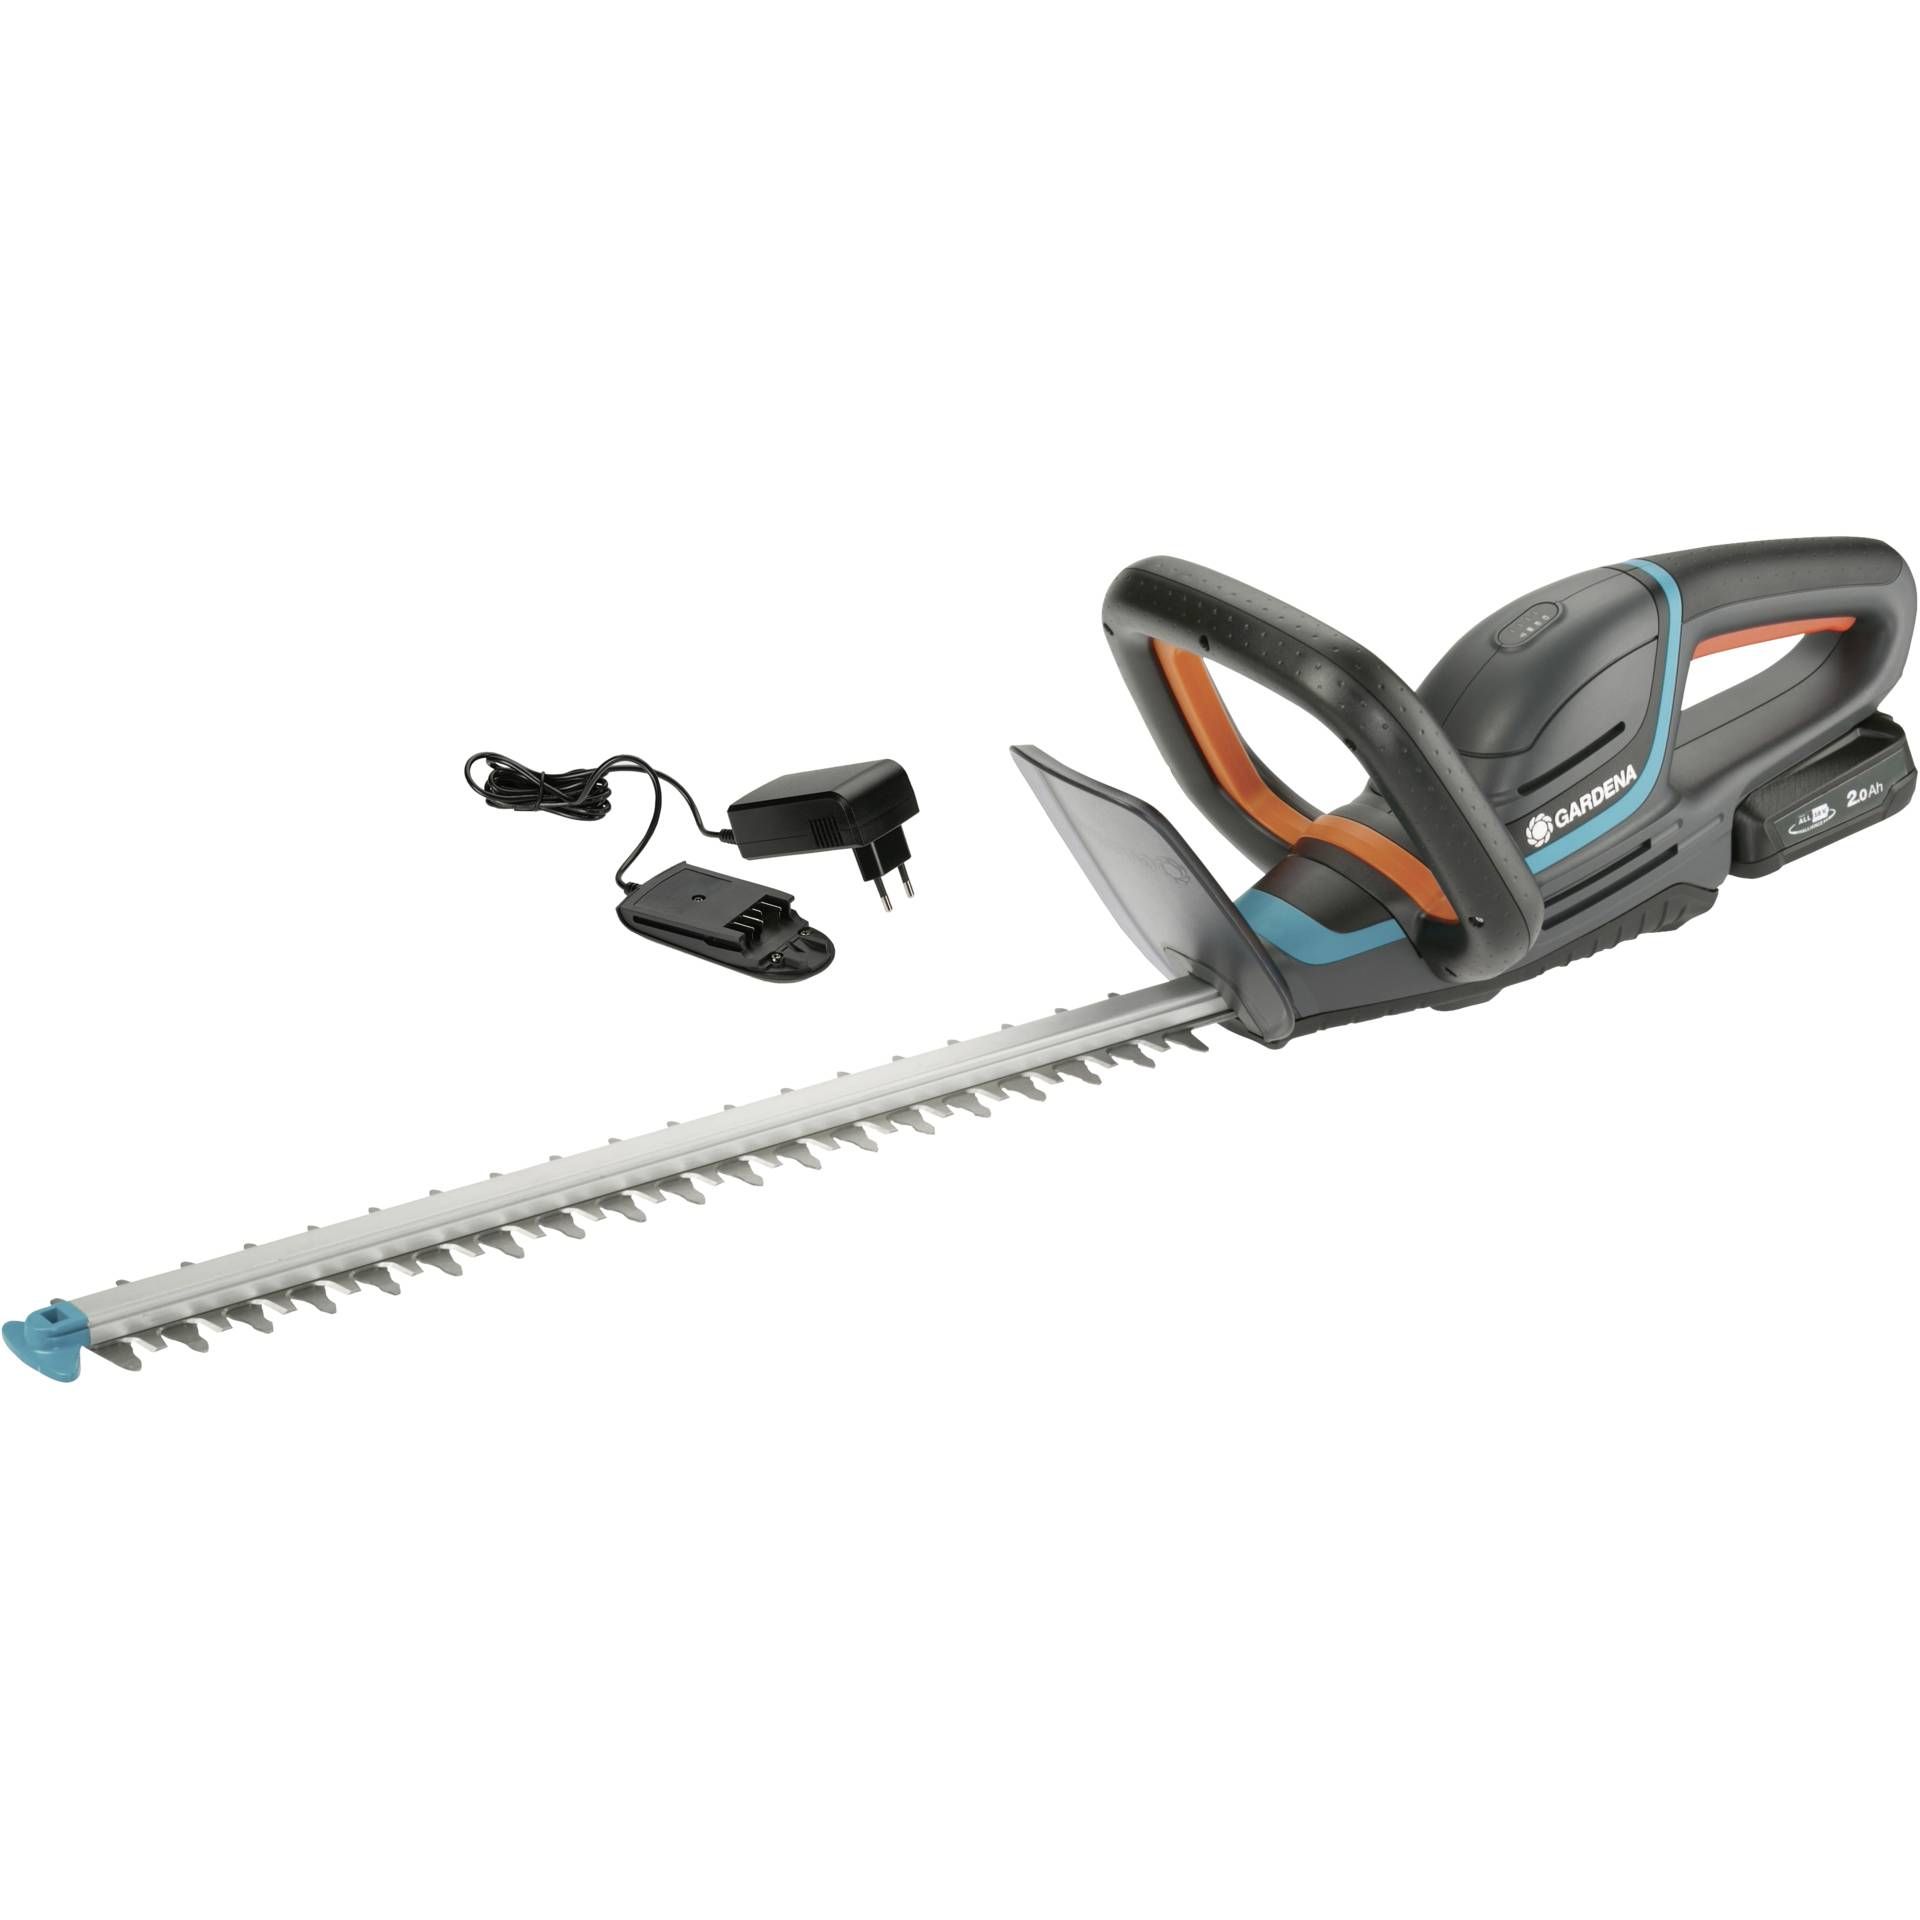 Gardena Hedge Trimmer Comfort Cut 50/18V-P4A Ready-To-Use Se